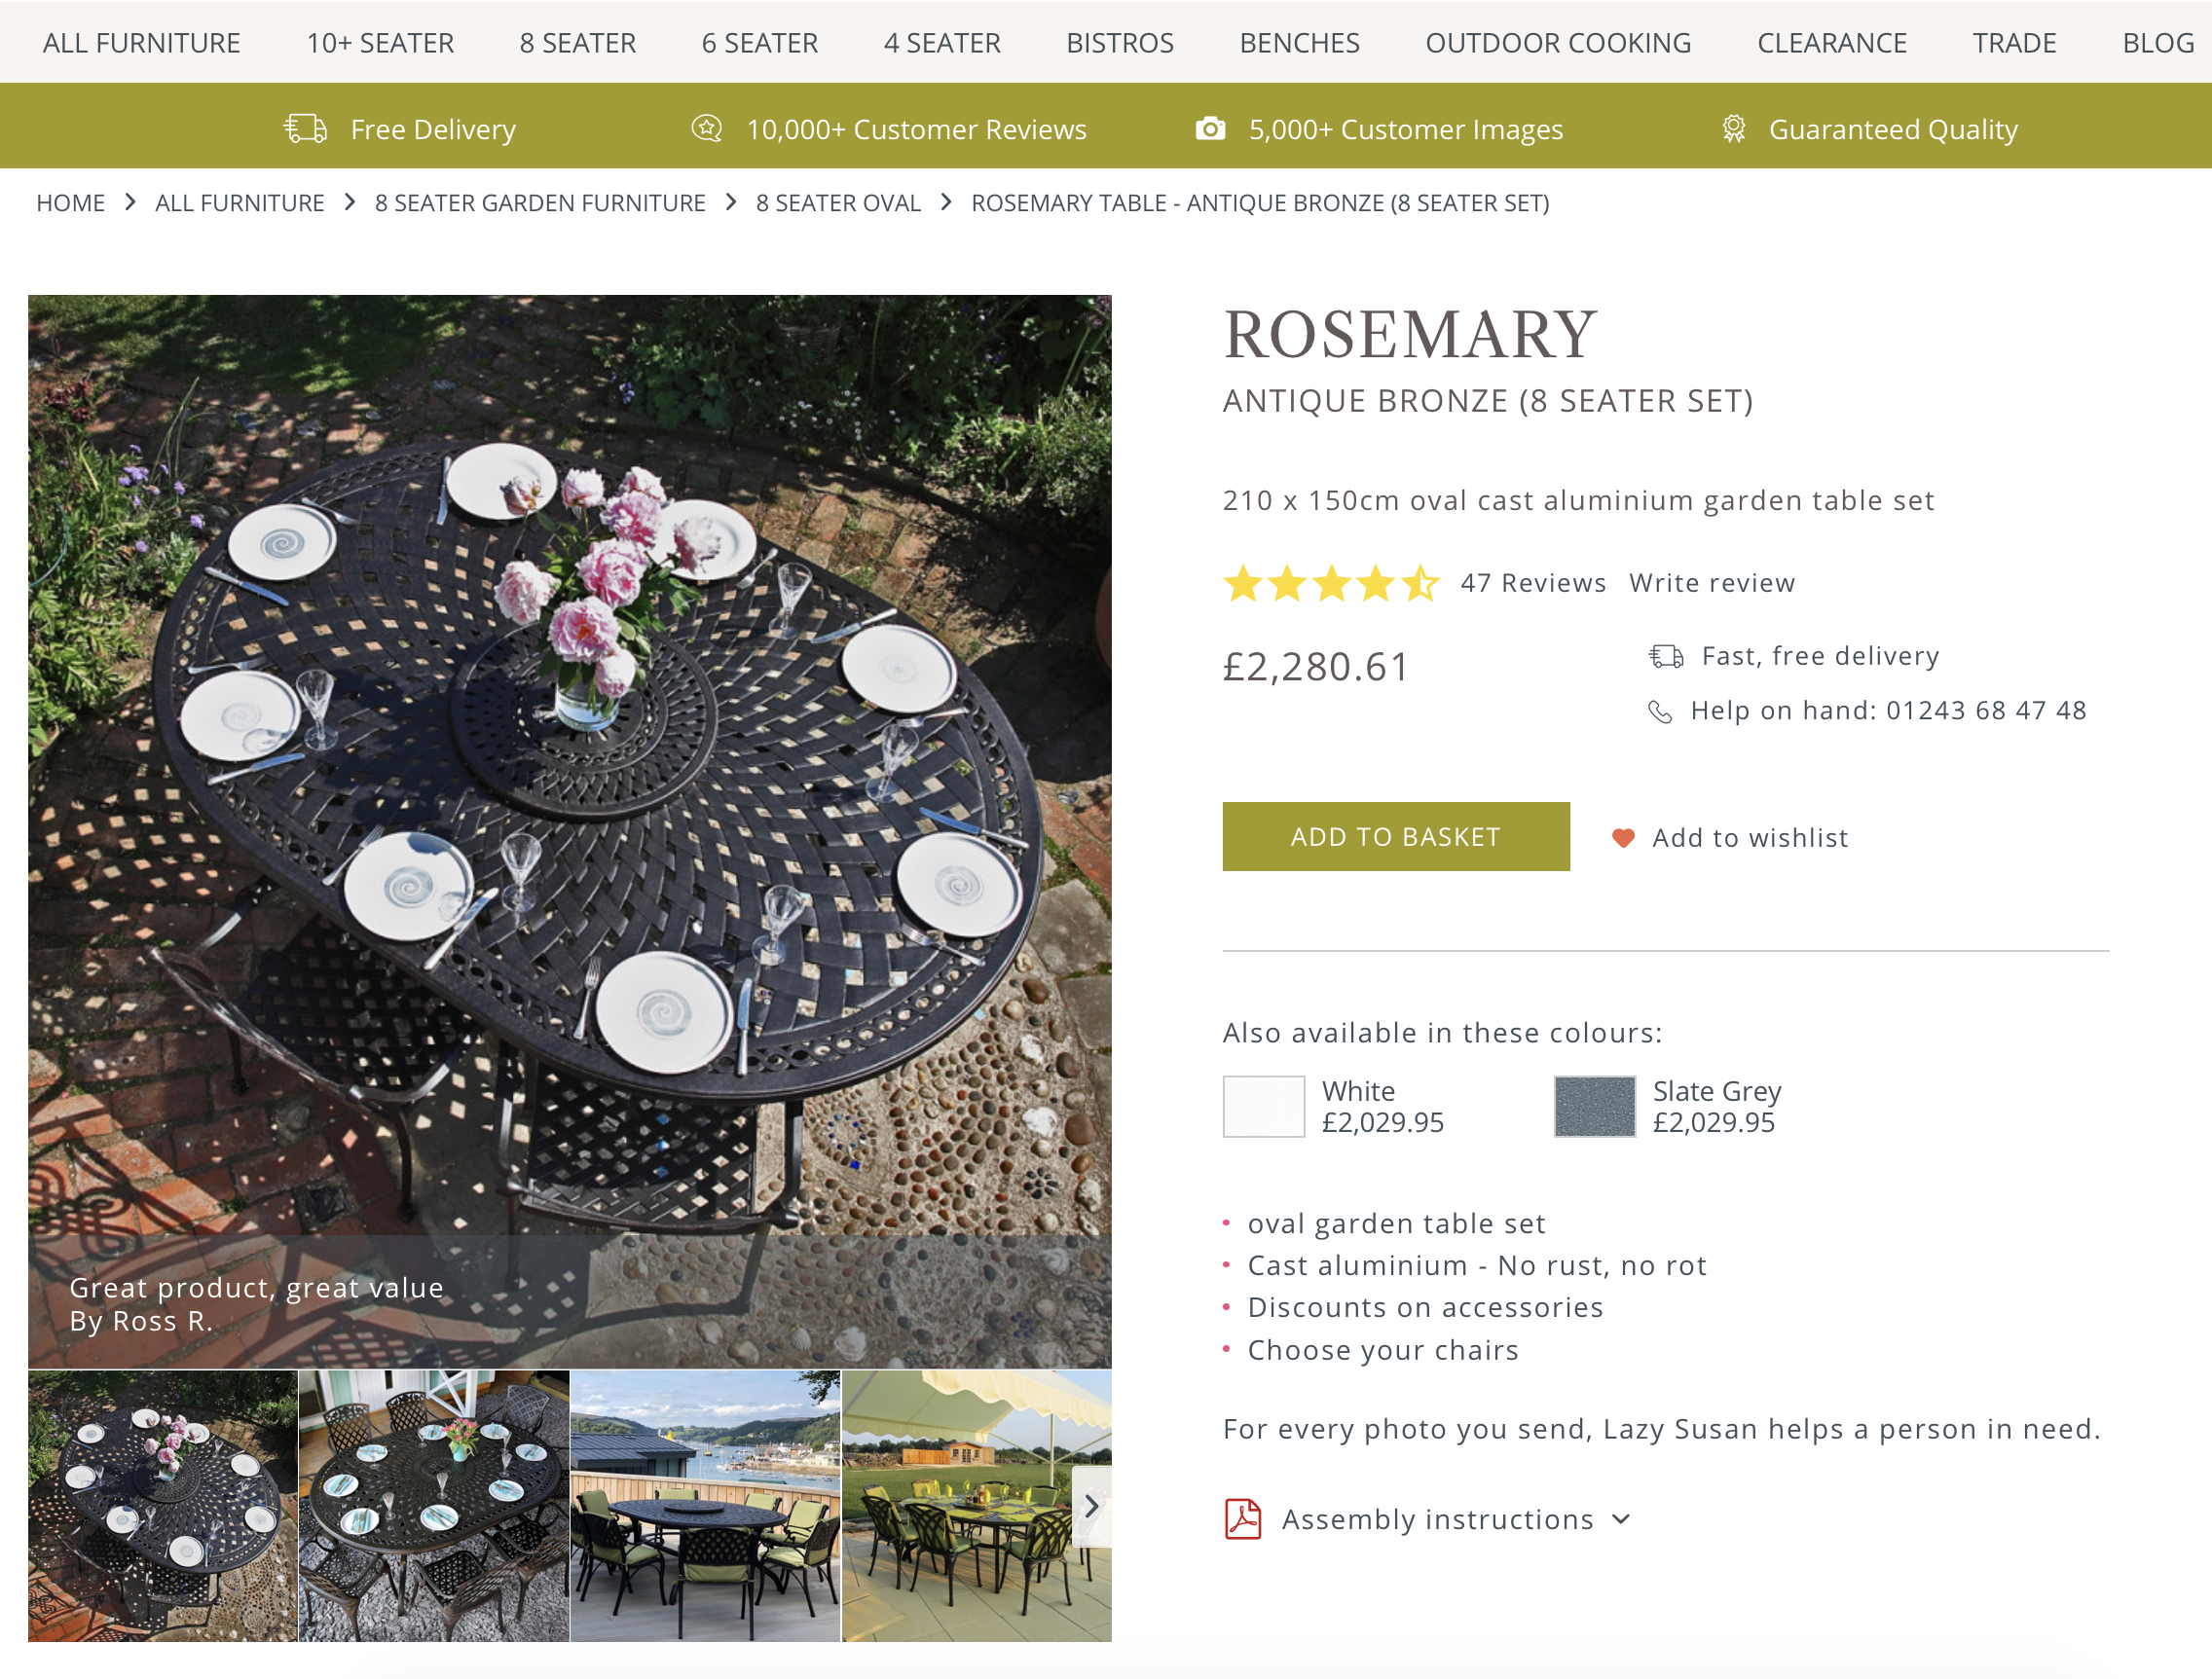 Rosemary Garden Furniture Set Product Page